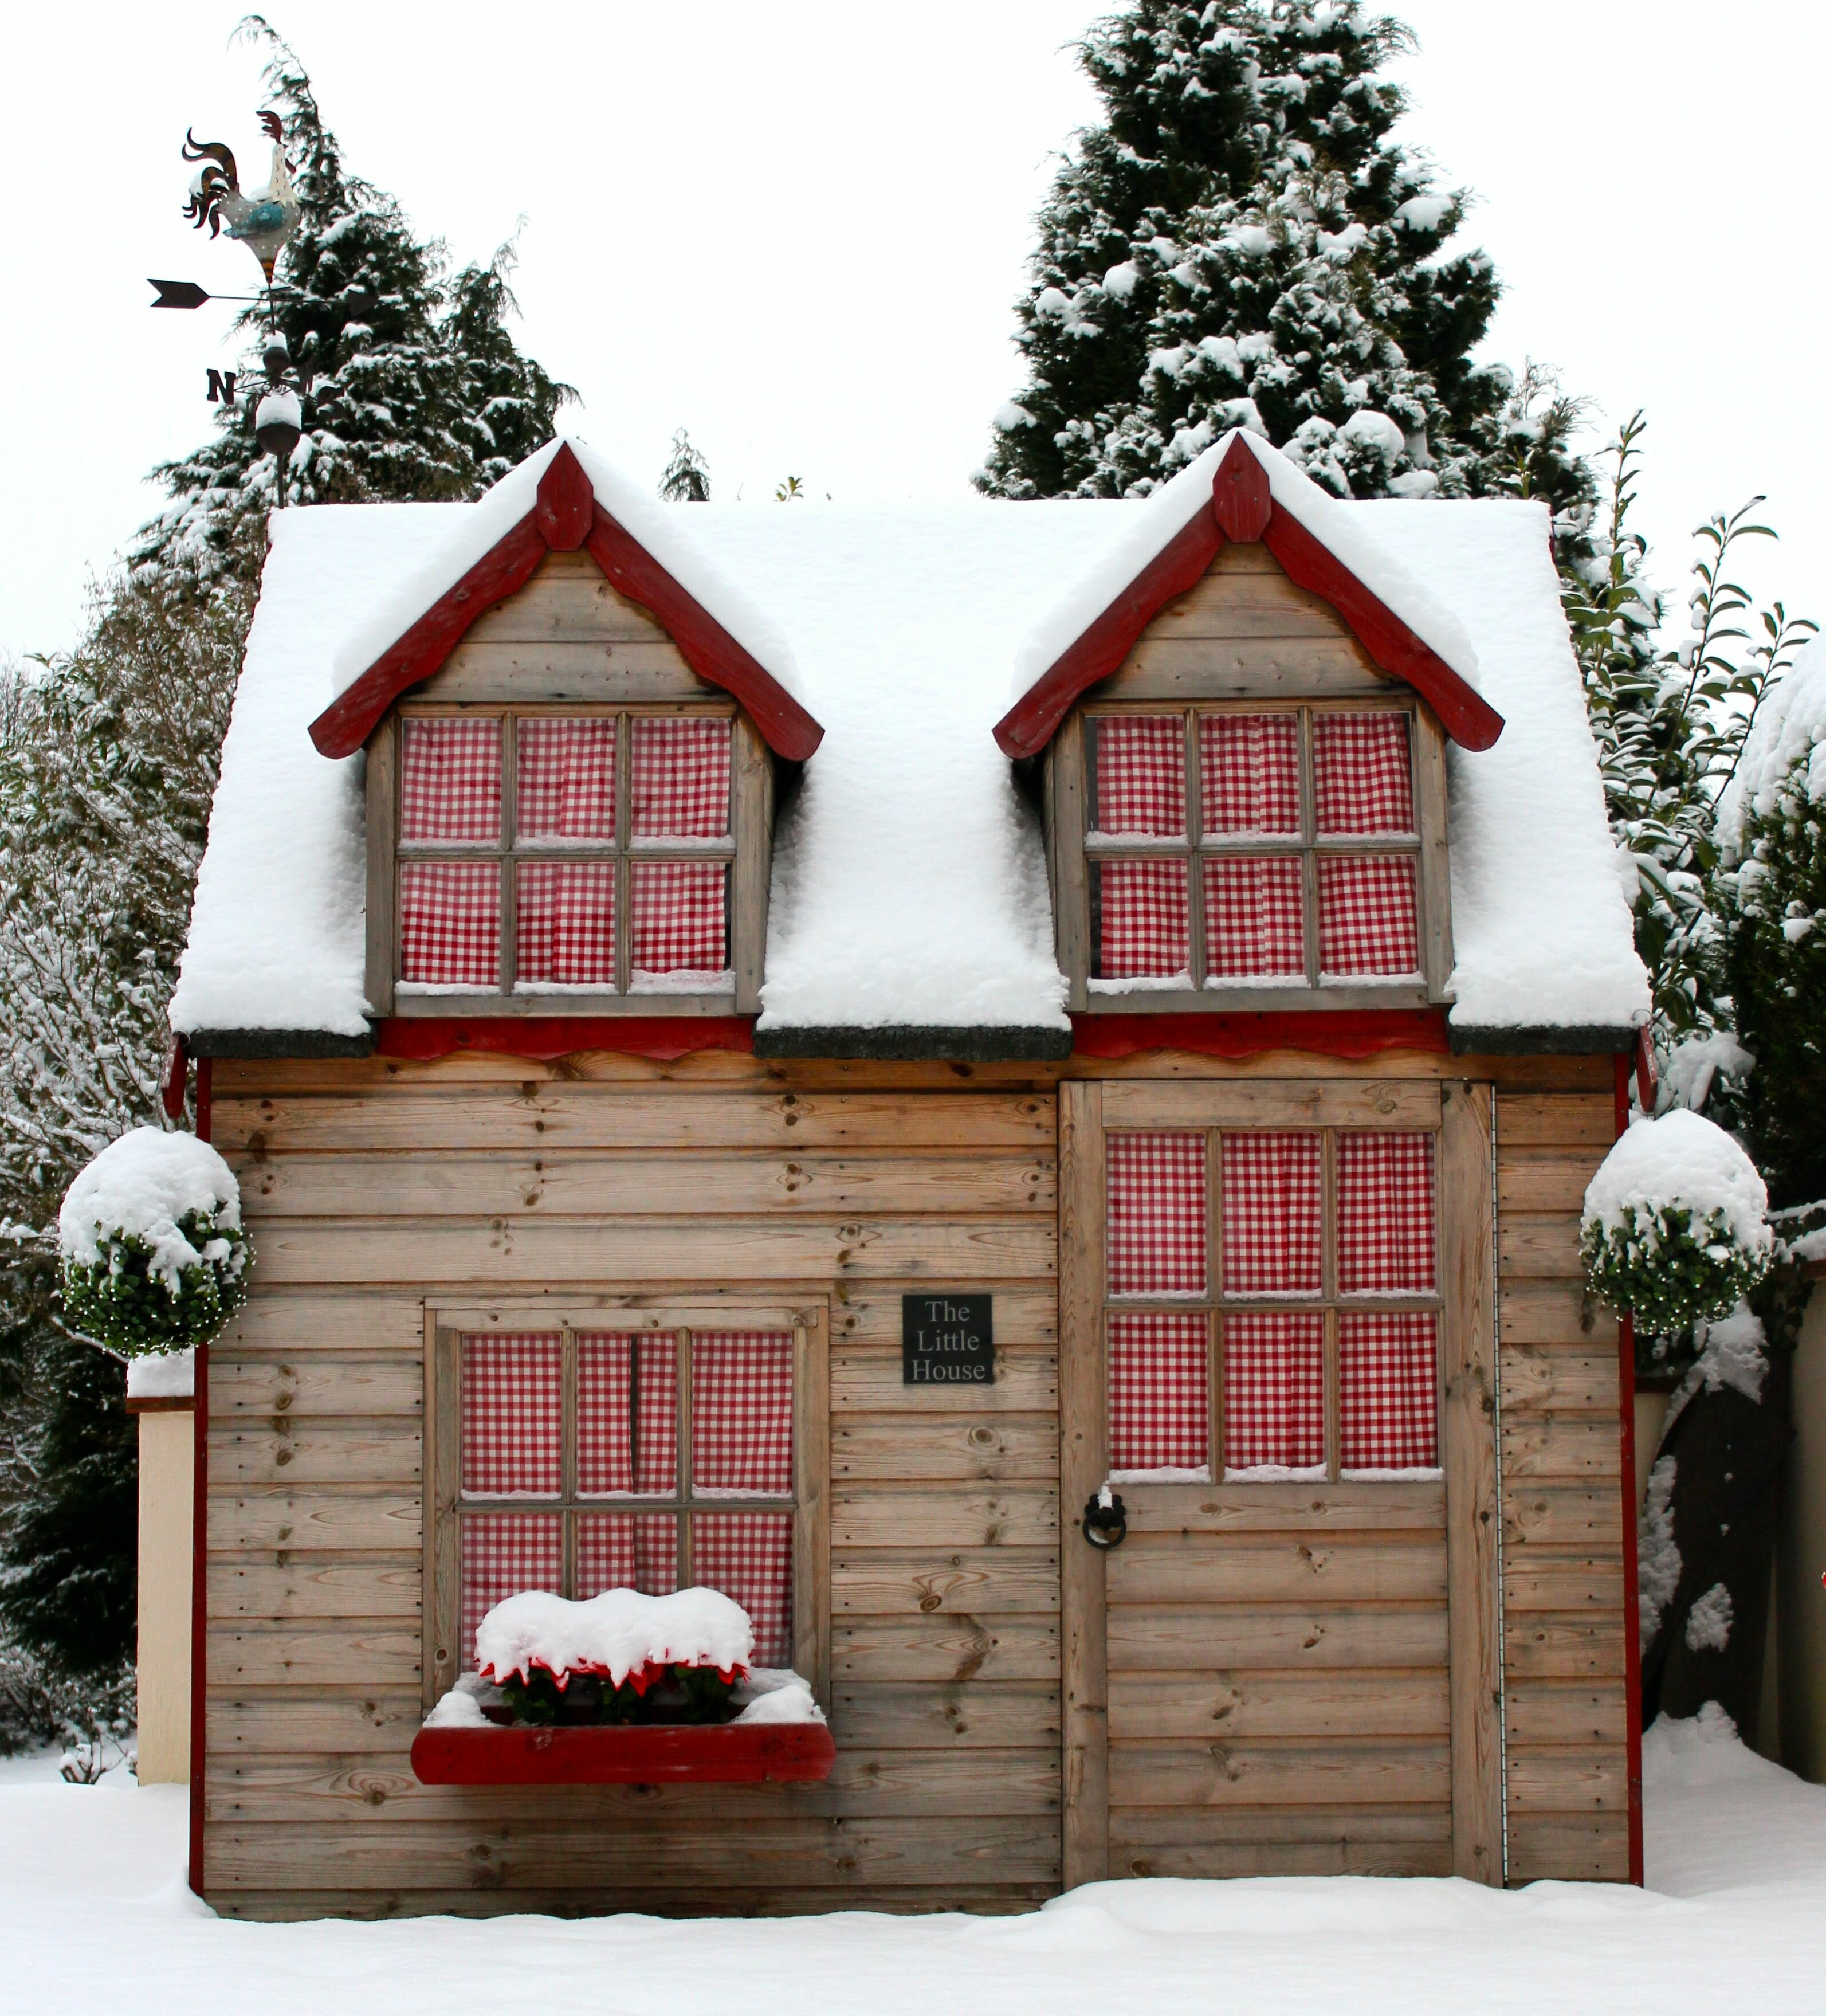 The Little House in Winter